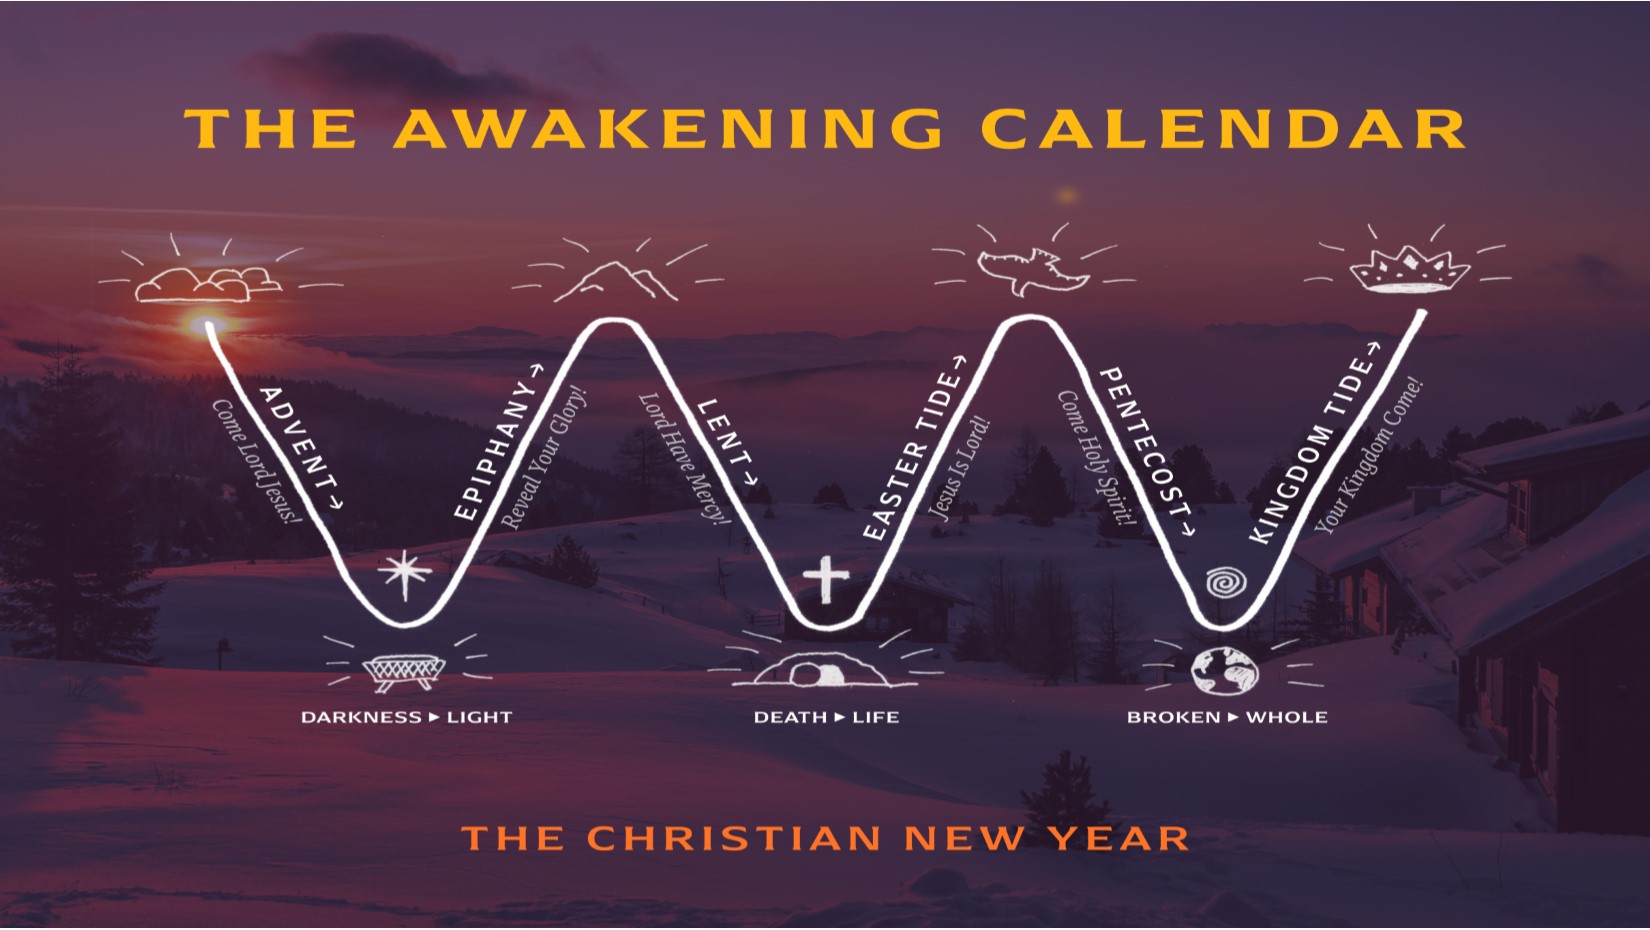 11.29.2020 1st Sunday of Advent The Christian New Year: A Year of Awakening Romans 13:11 – 14